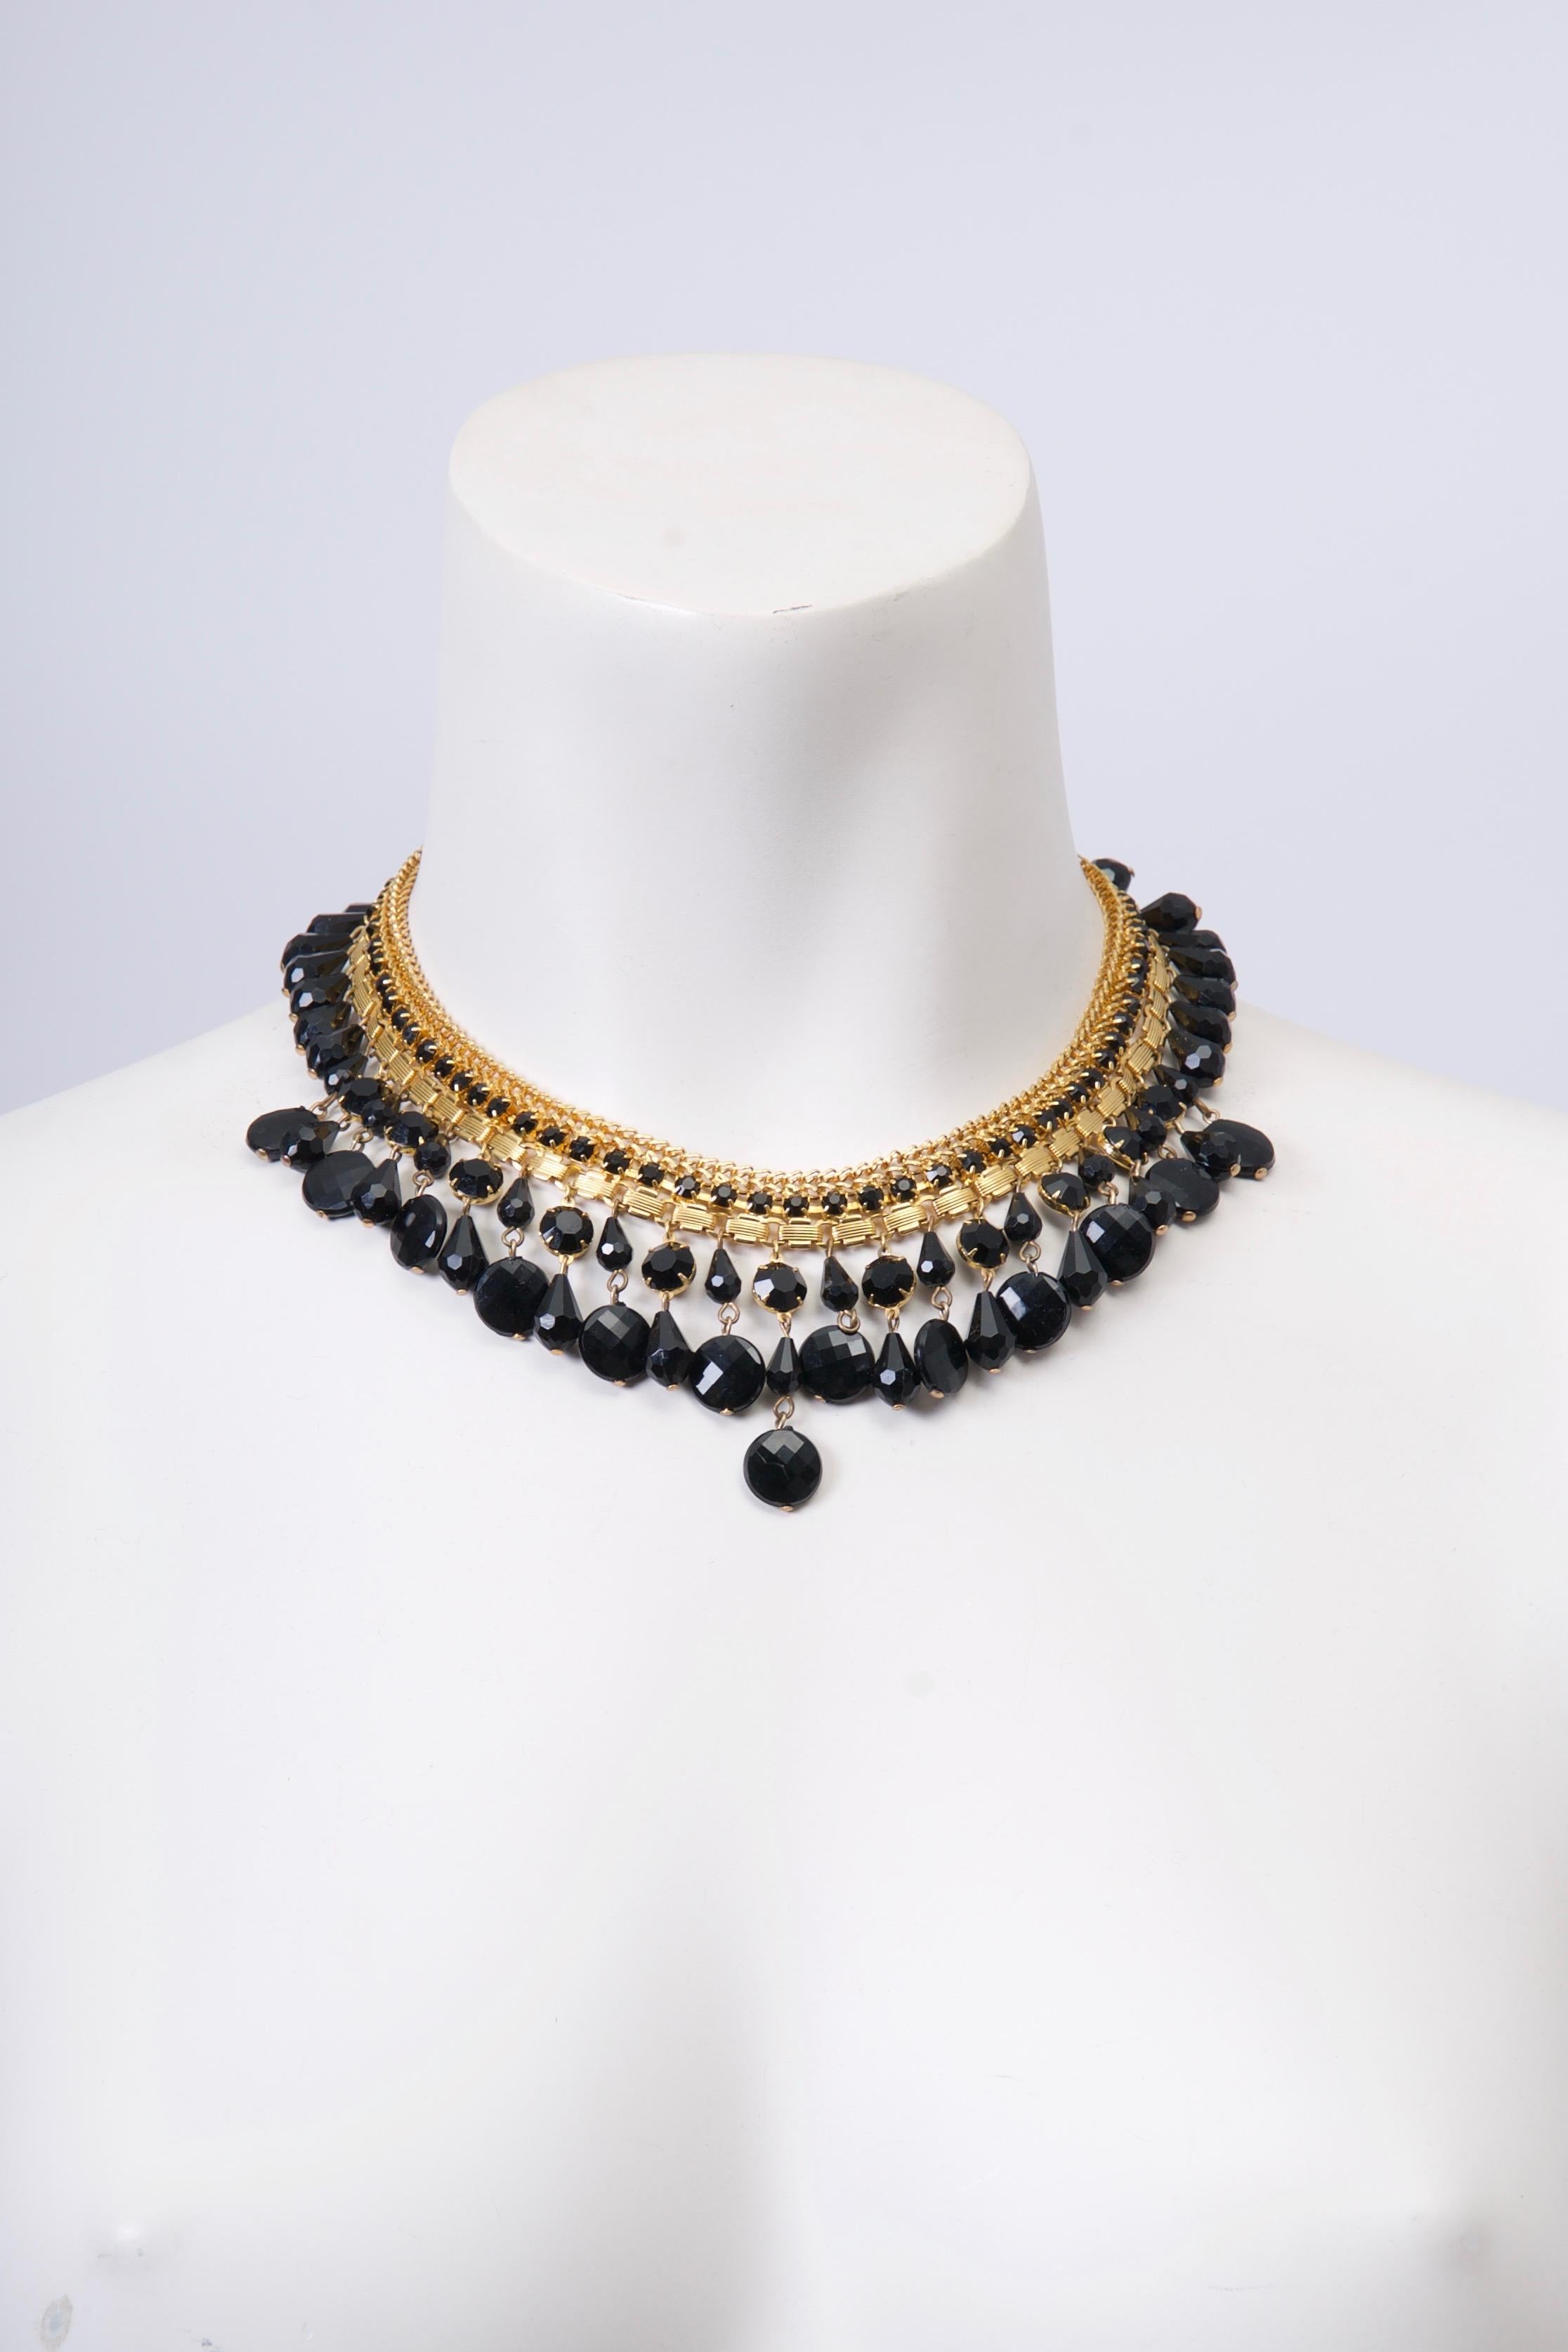 Goldtone and black bead necklace by Jonné, a short-lived division of Schrager, sits gracefully at the nape of the neck. A double row of various faceted black beads are suspended from the goldtone neckpiece, which is composed of three different rows,